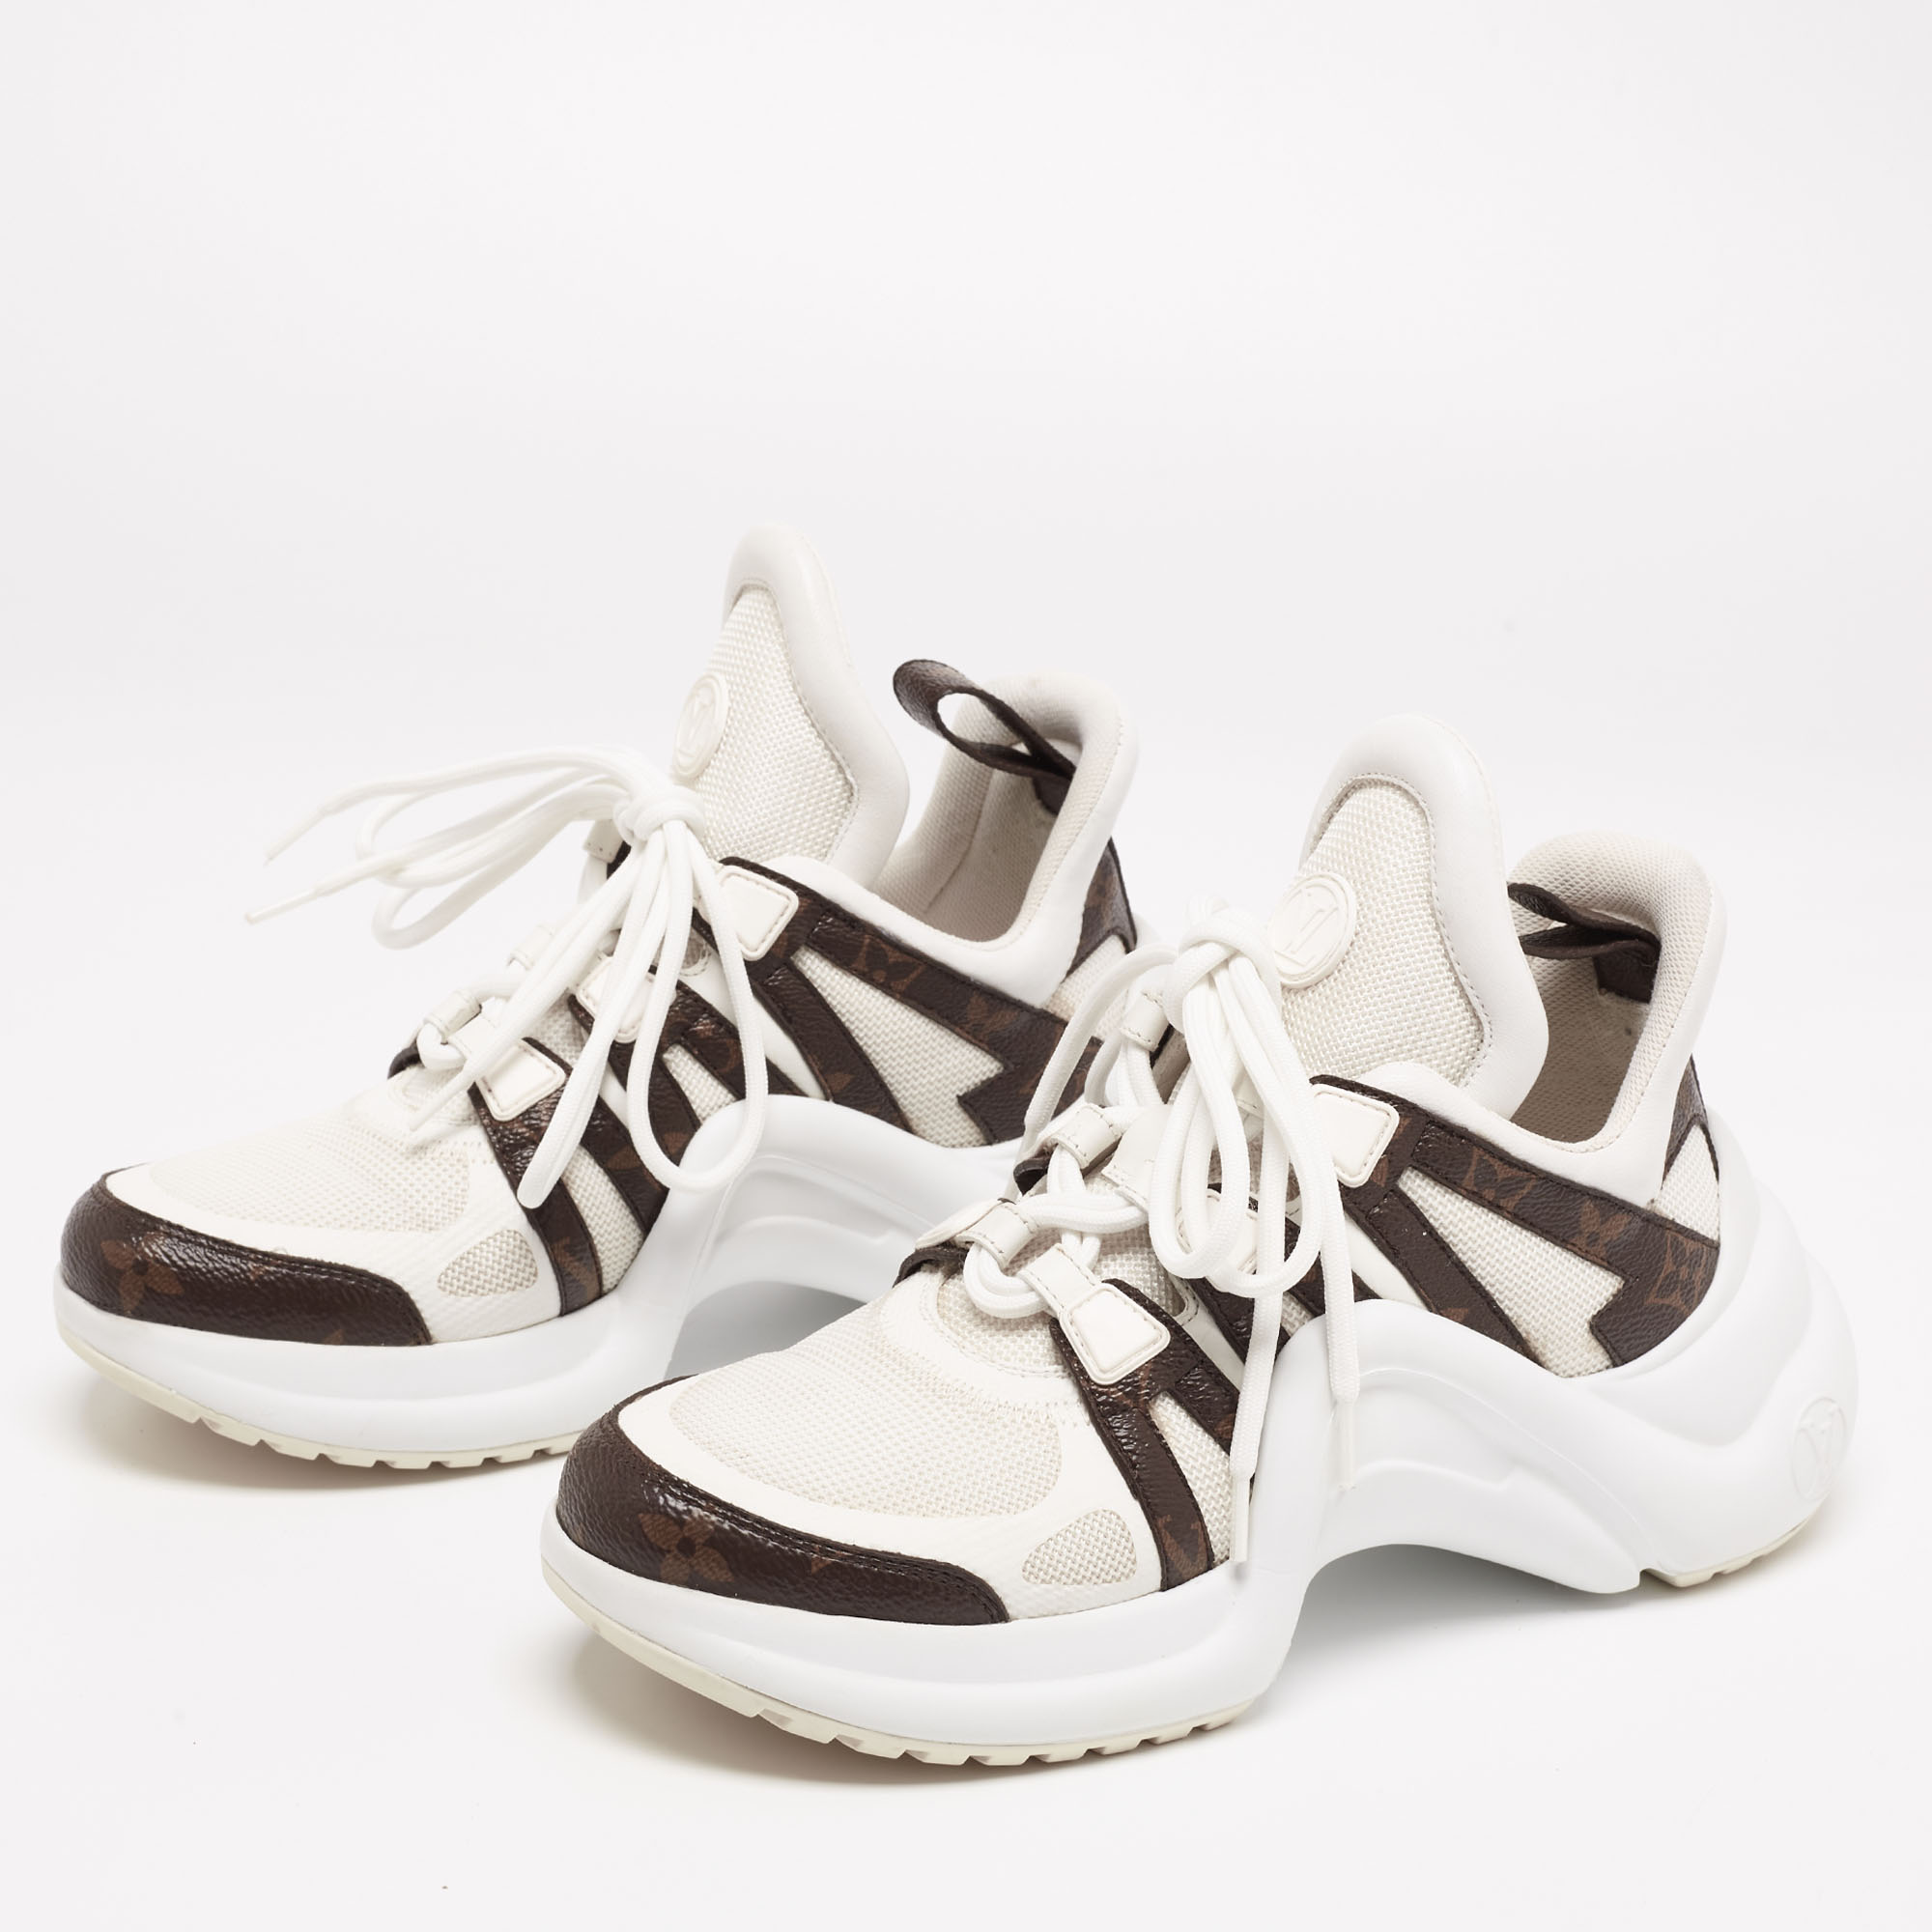 

Louis Vuitton Off-White/Brown Mesh and Monogram Coated Canvas Archlight Low-Top Sneakers Size